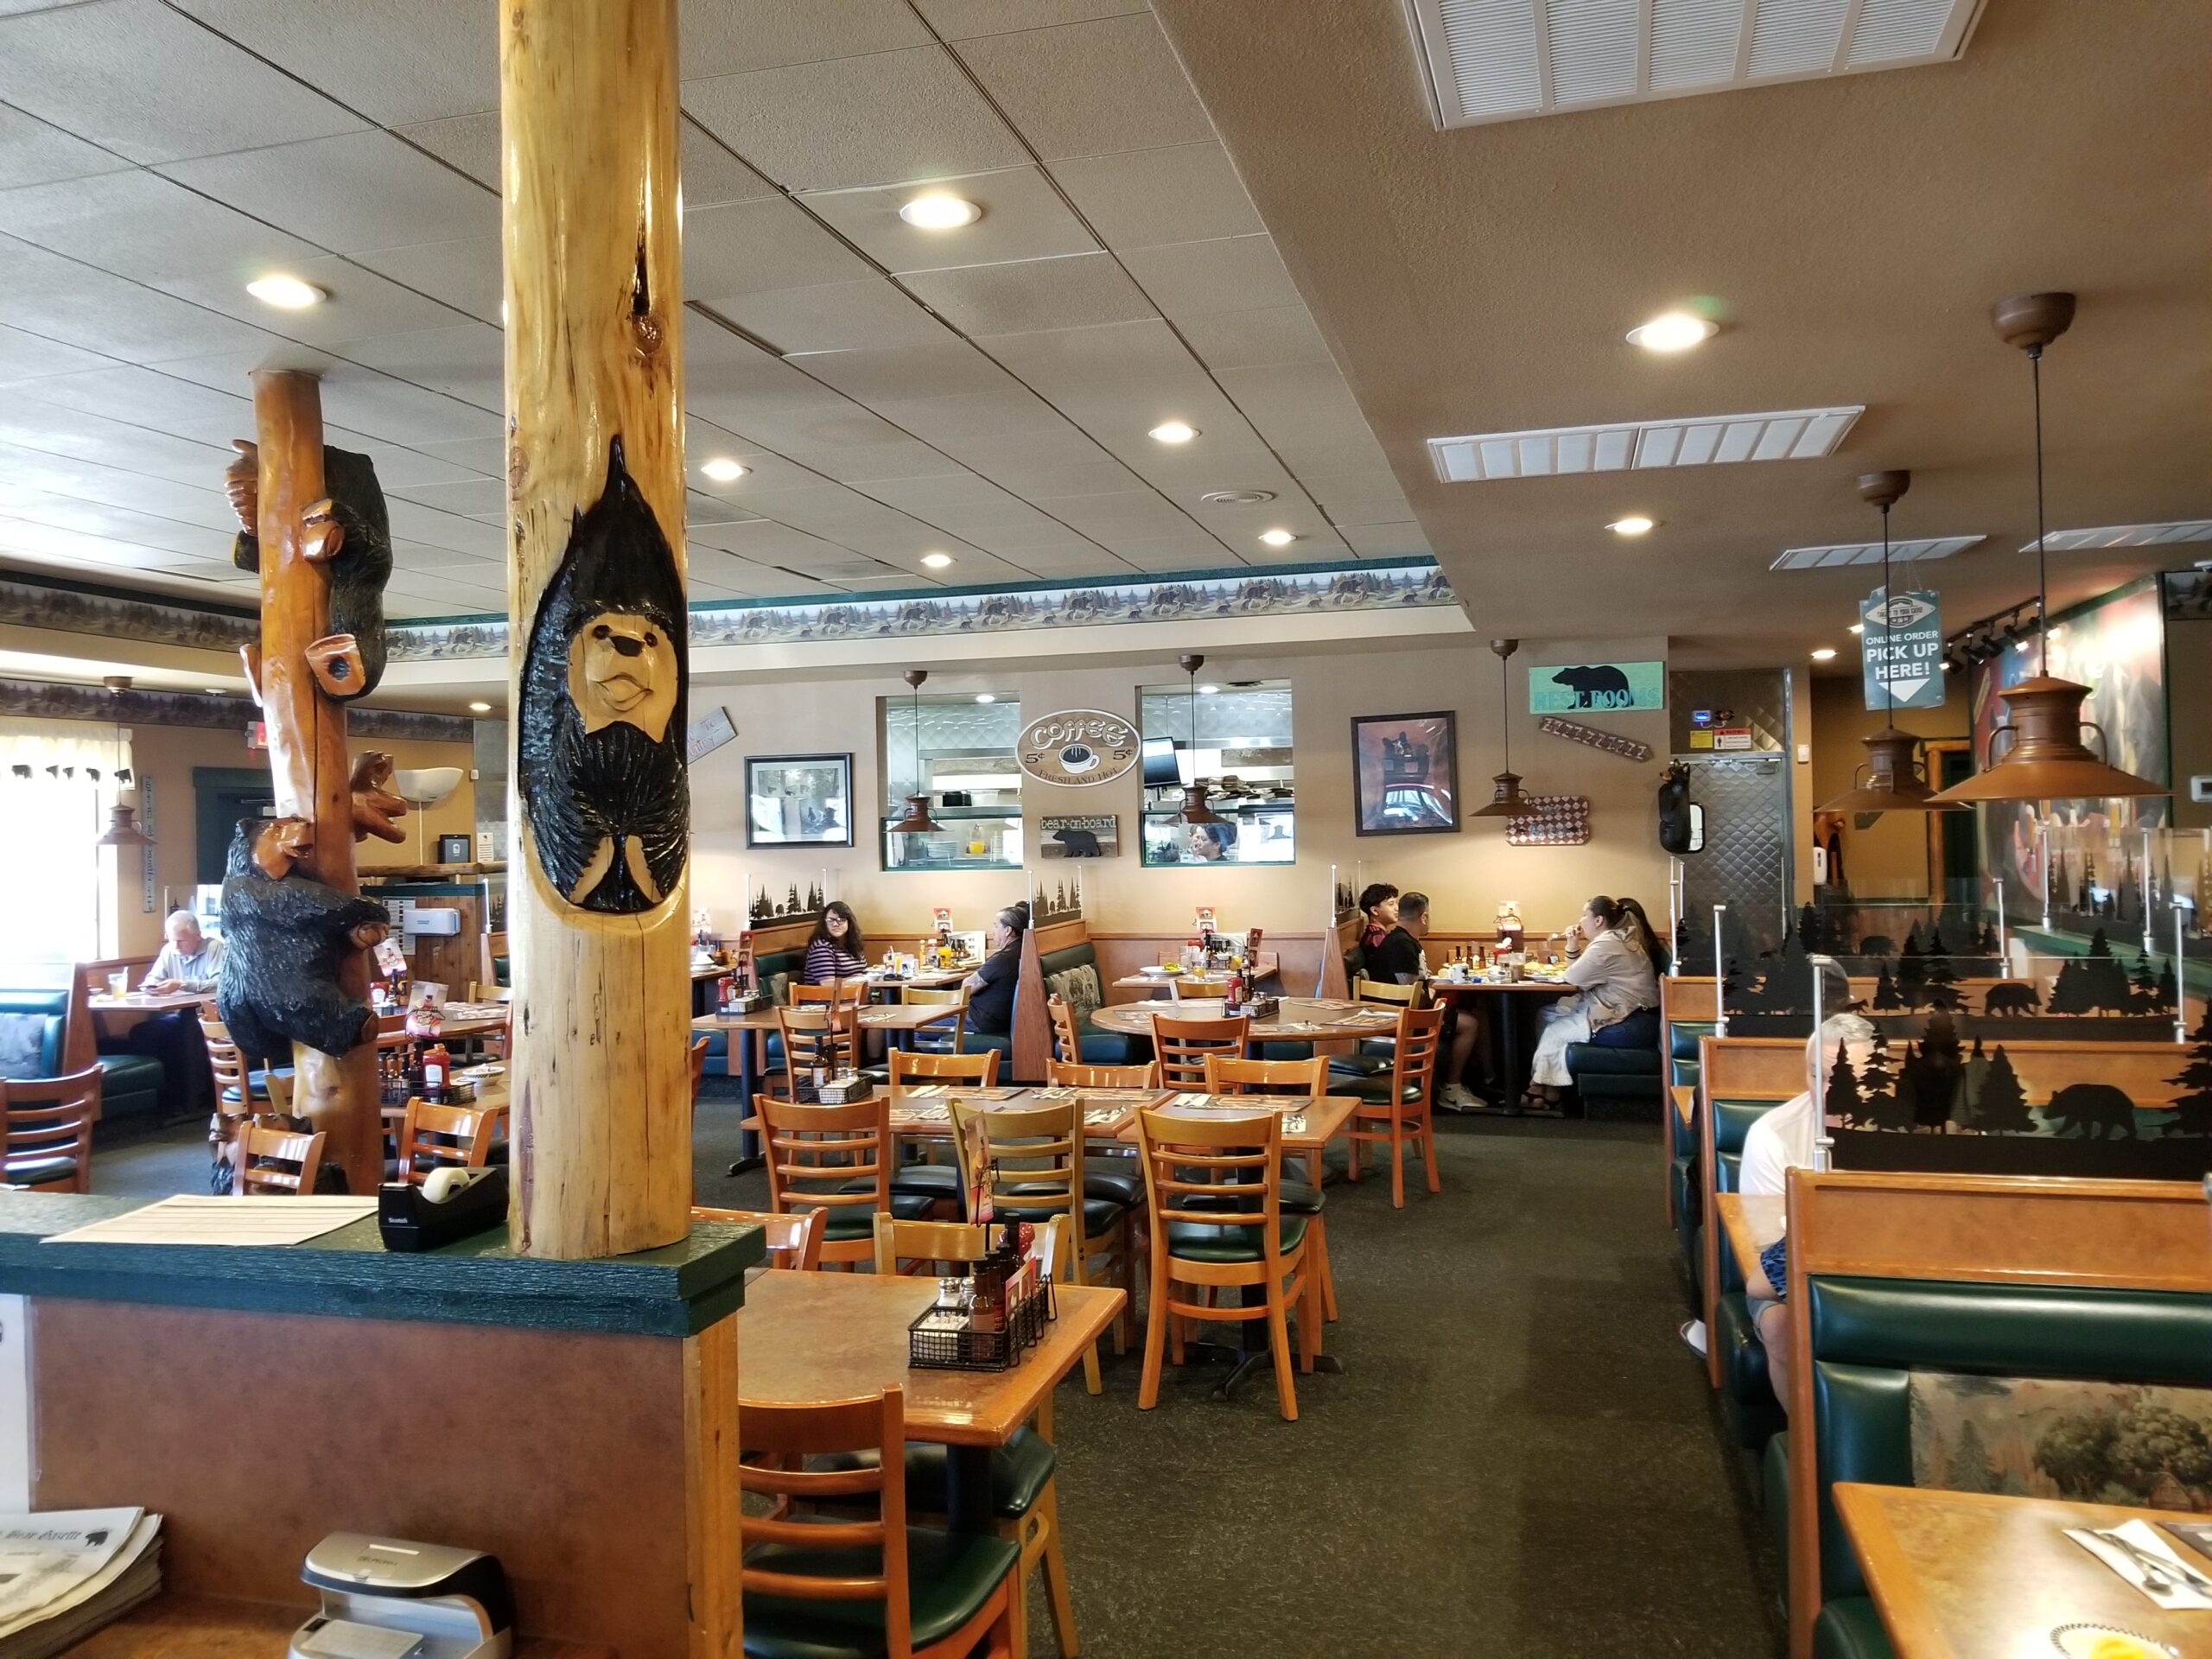 This image shows the dining room at the Black Bear Diner in Las Vegas. It features many pieces of artwork carved from wood with bear motifs.